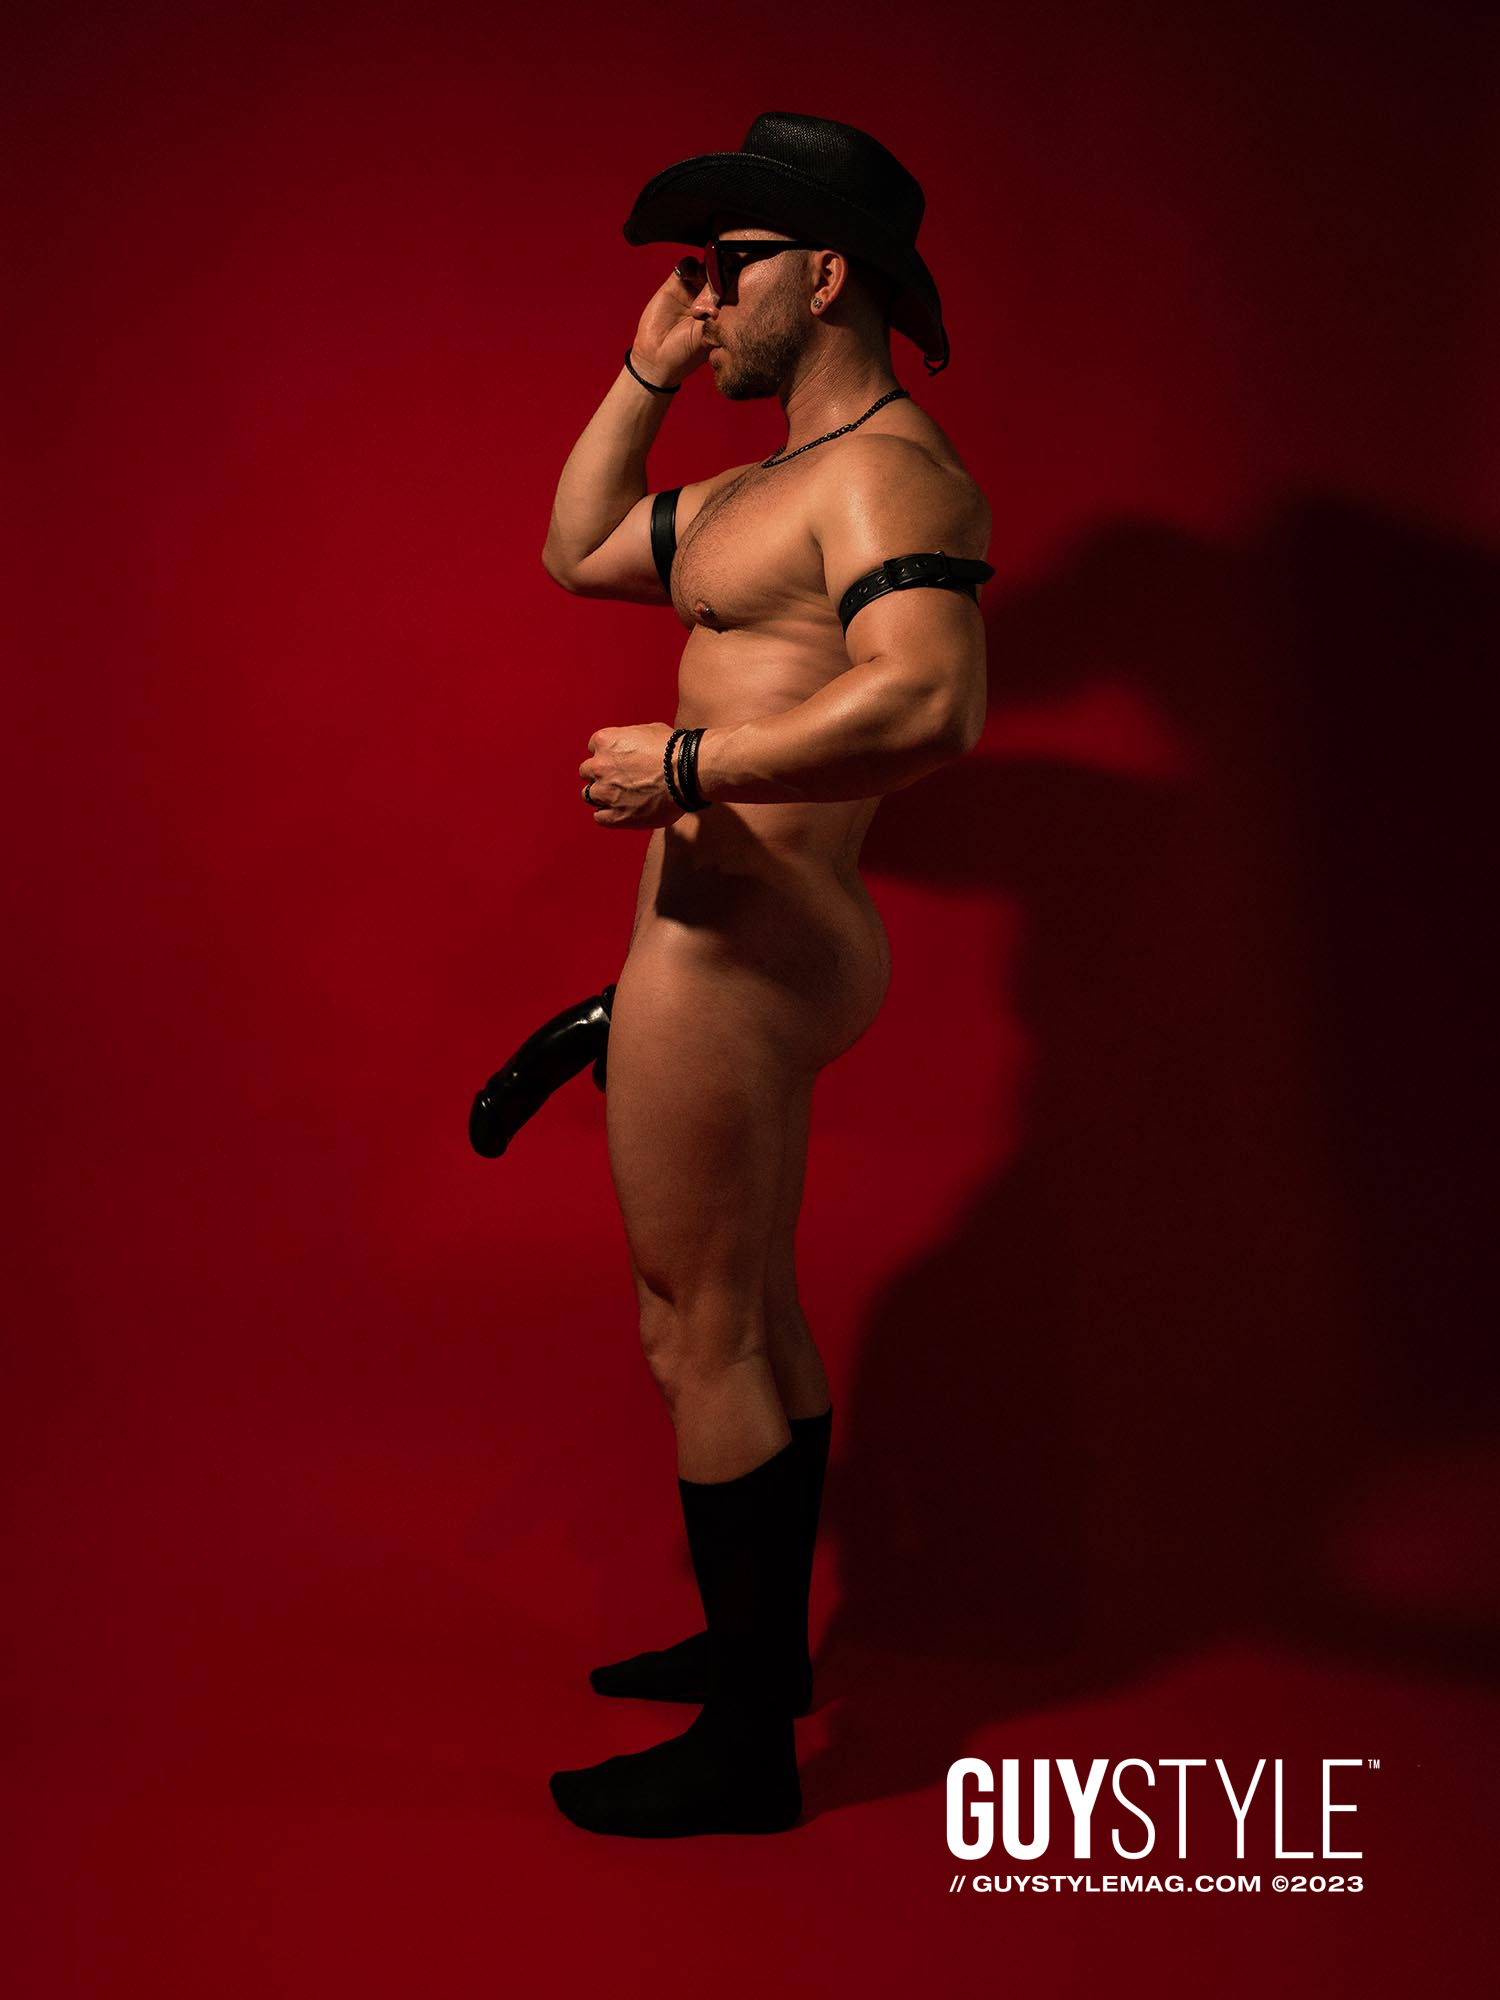 Red, Black, and Daring: Maxwell Alexander's Queer Art Extravaganza ft. Cocky Cowboy – Presented by HARD NEW YORK – The Best Homoerotic Art Prints on Canvas